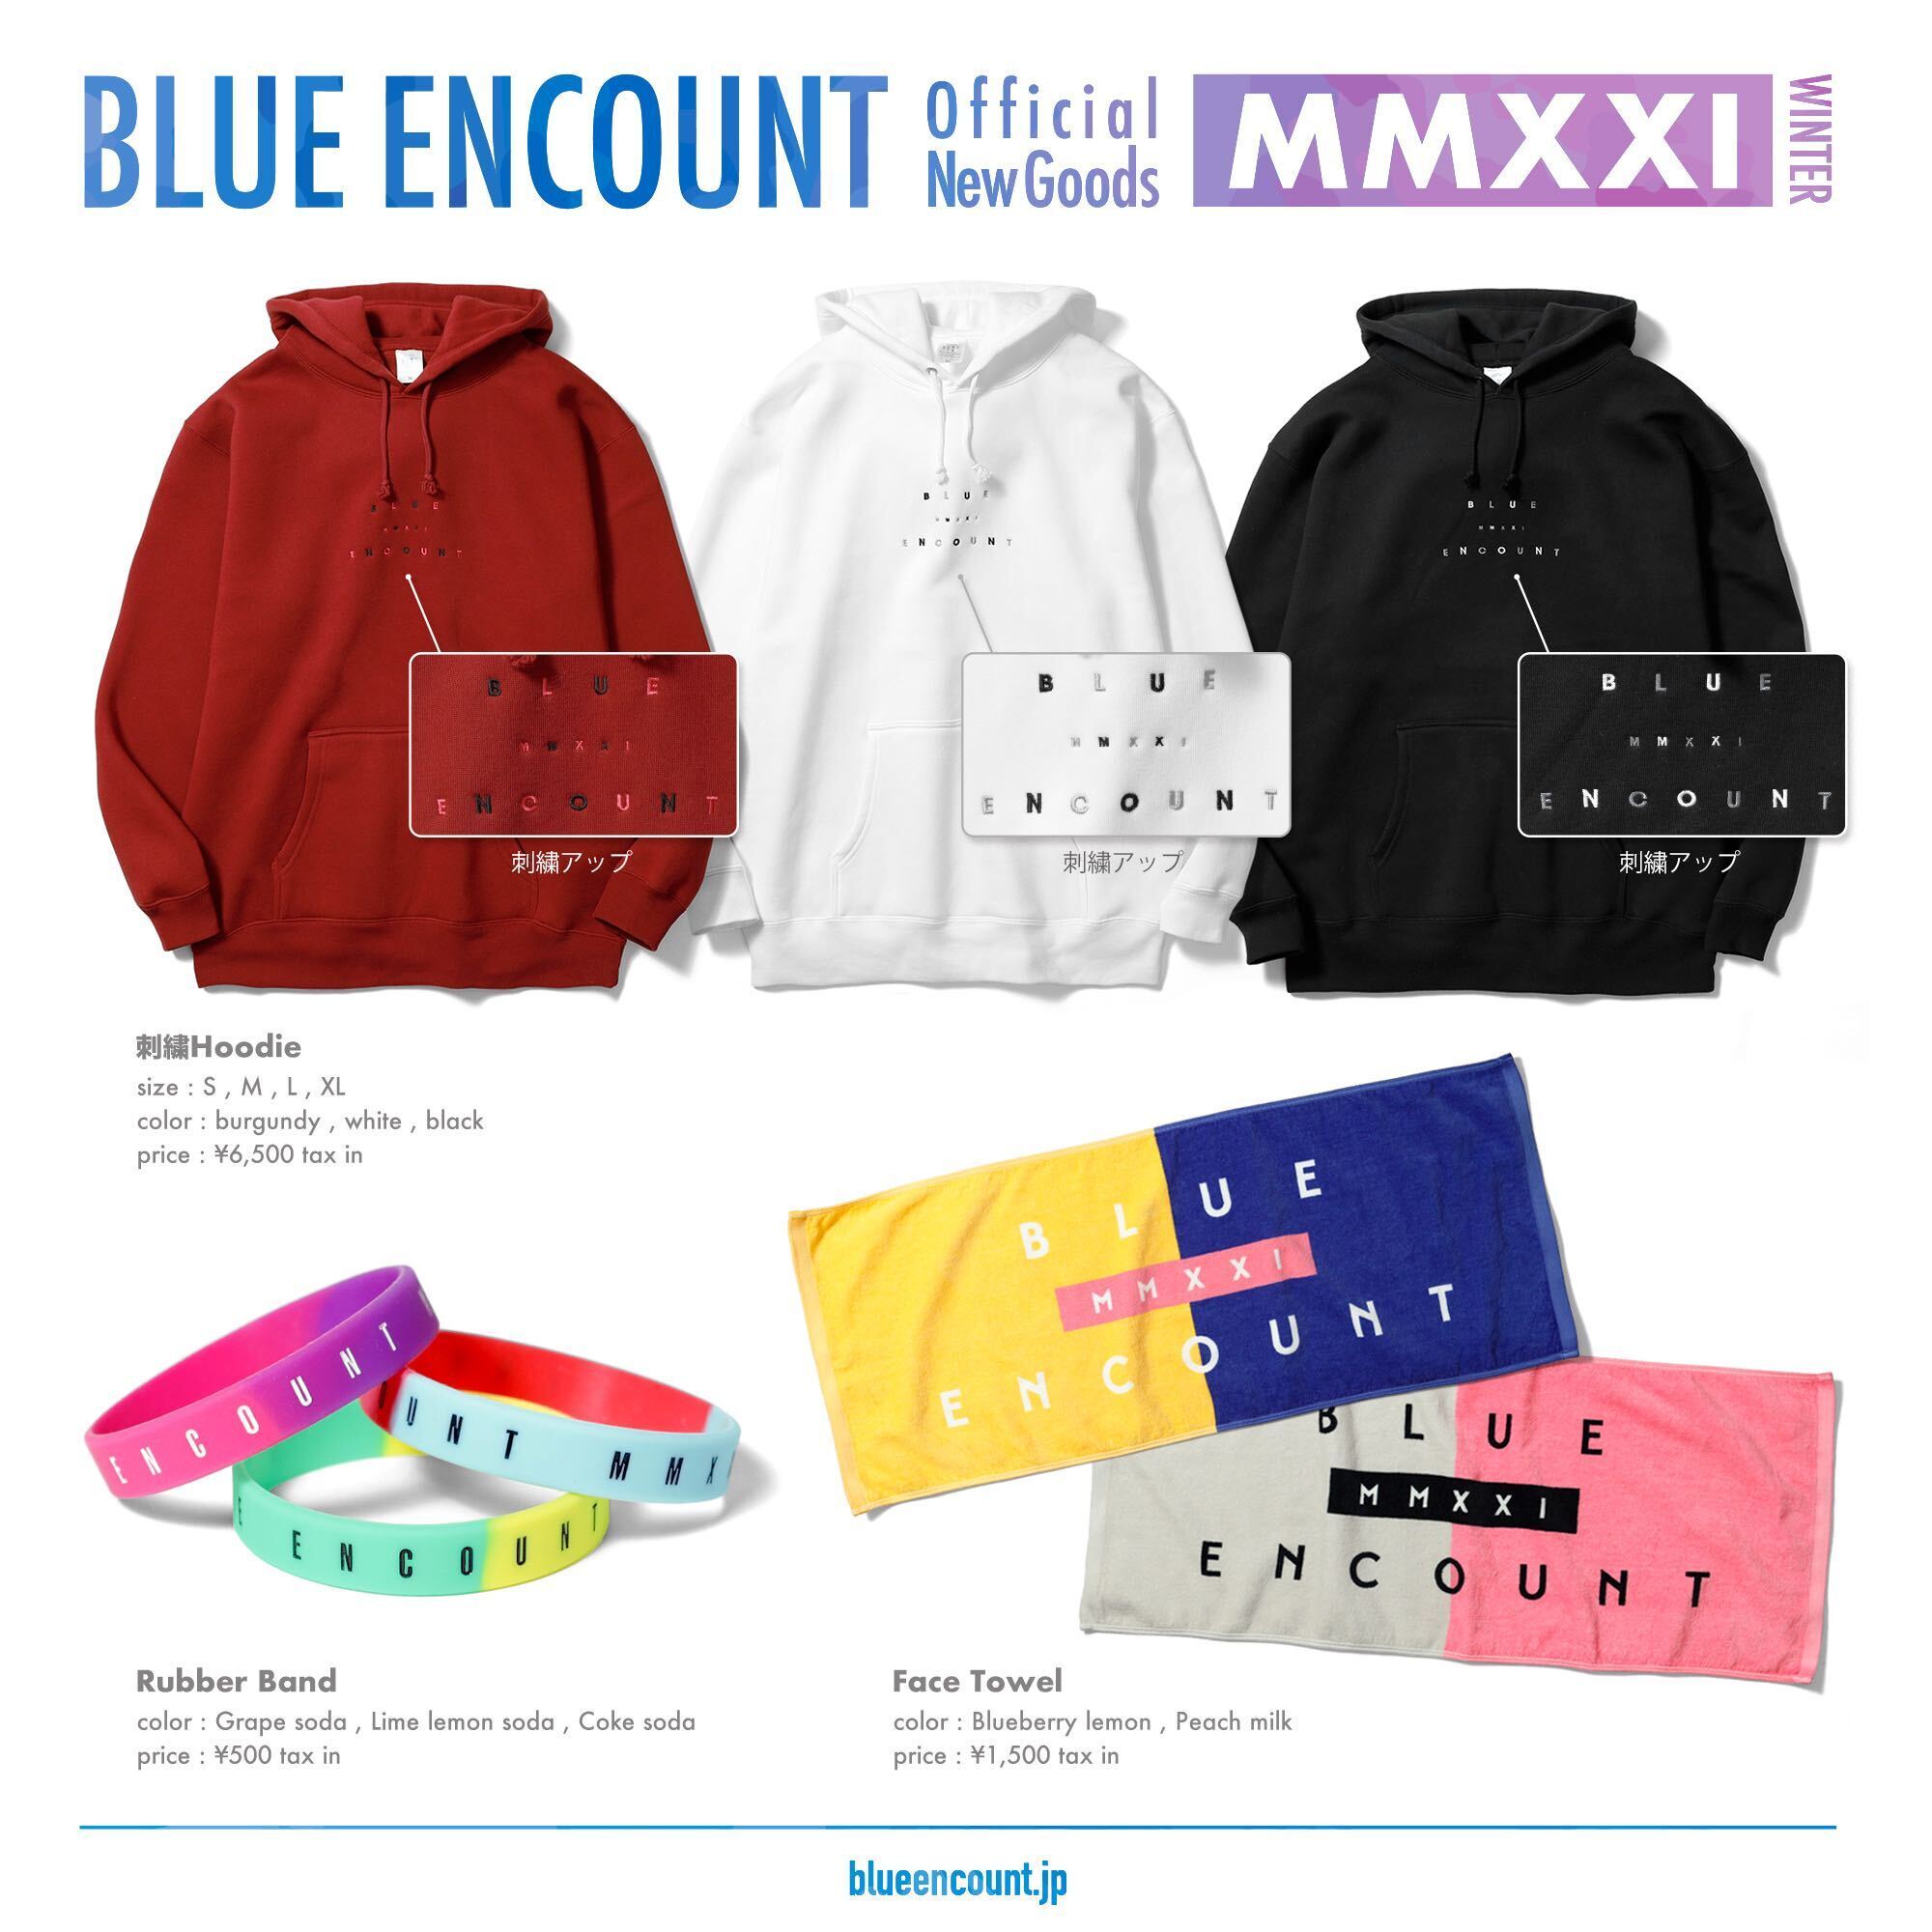 BLUE ENCOUNT Official New Goods